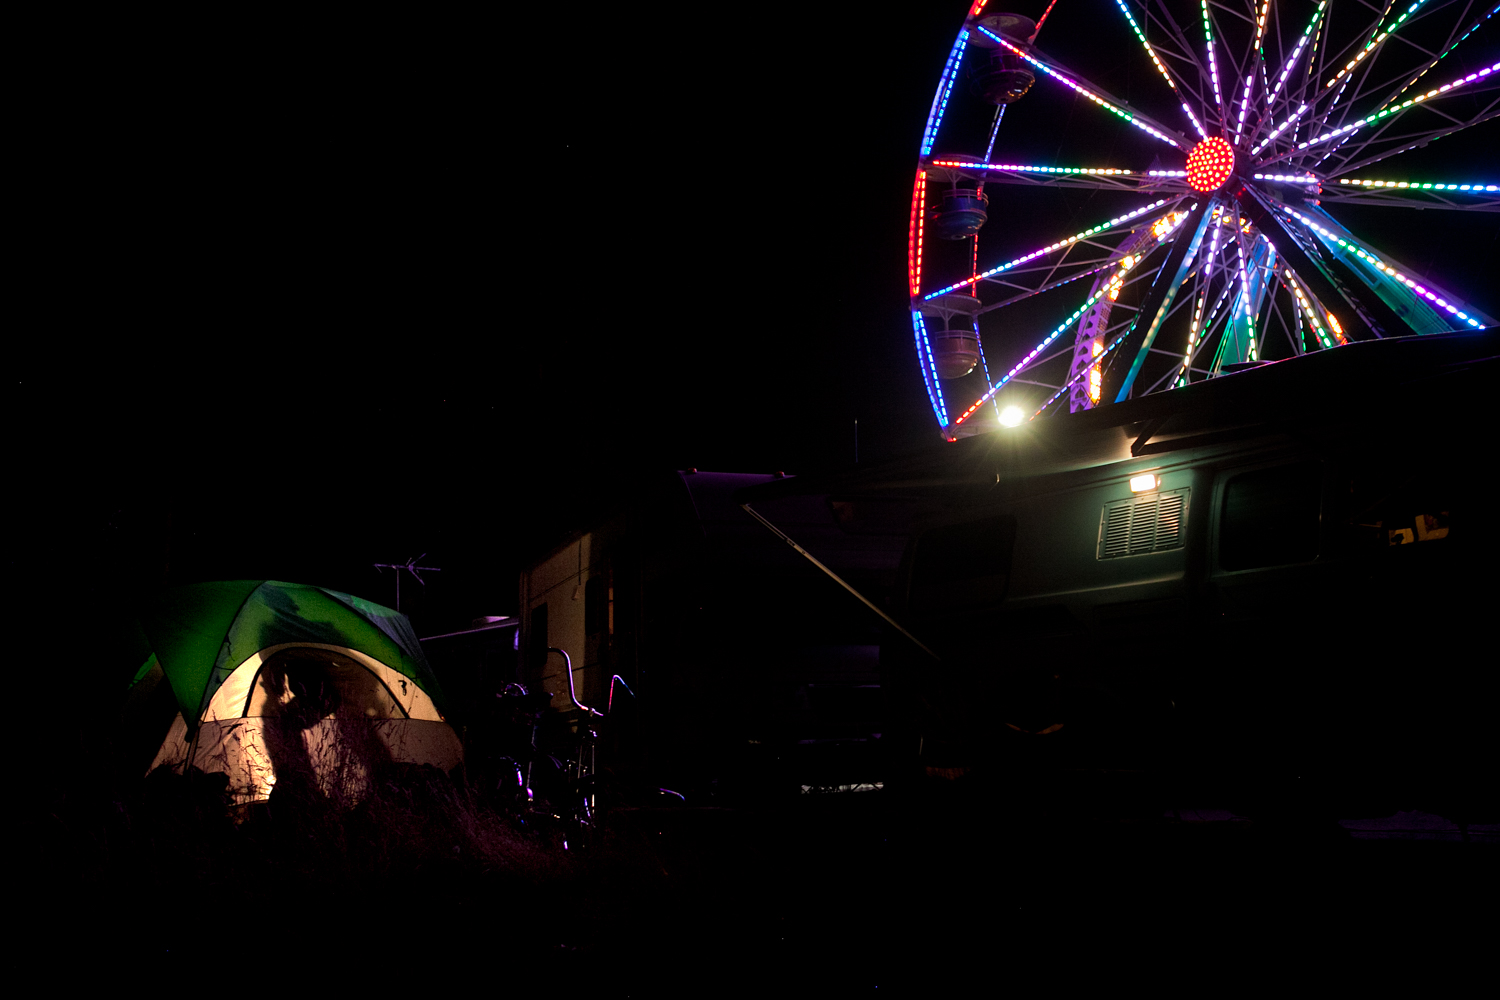  Workers setup camp and live in close proximity to the carnival grounds. At night, a man prepares for bed in his tent while the Ferris Wheel illuminates the surrounding area. 